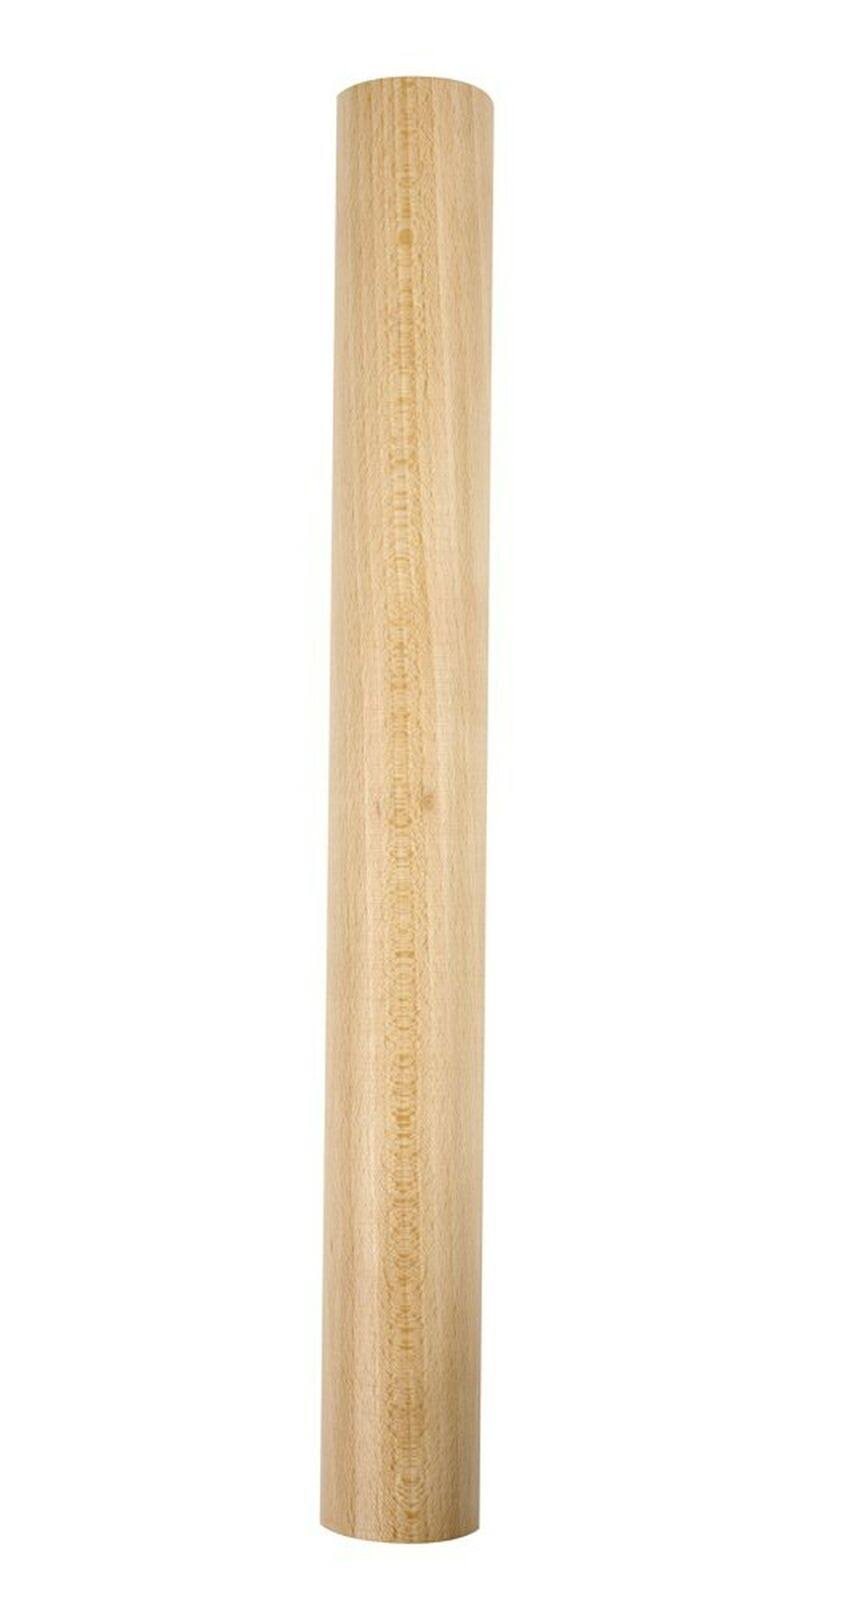 T&G Professional Solid Rolling Pin - Beech Wood